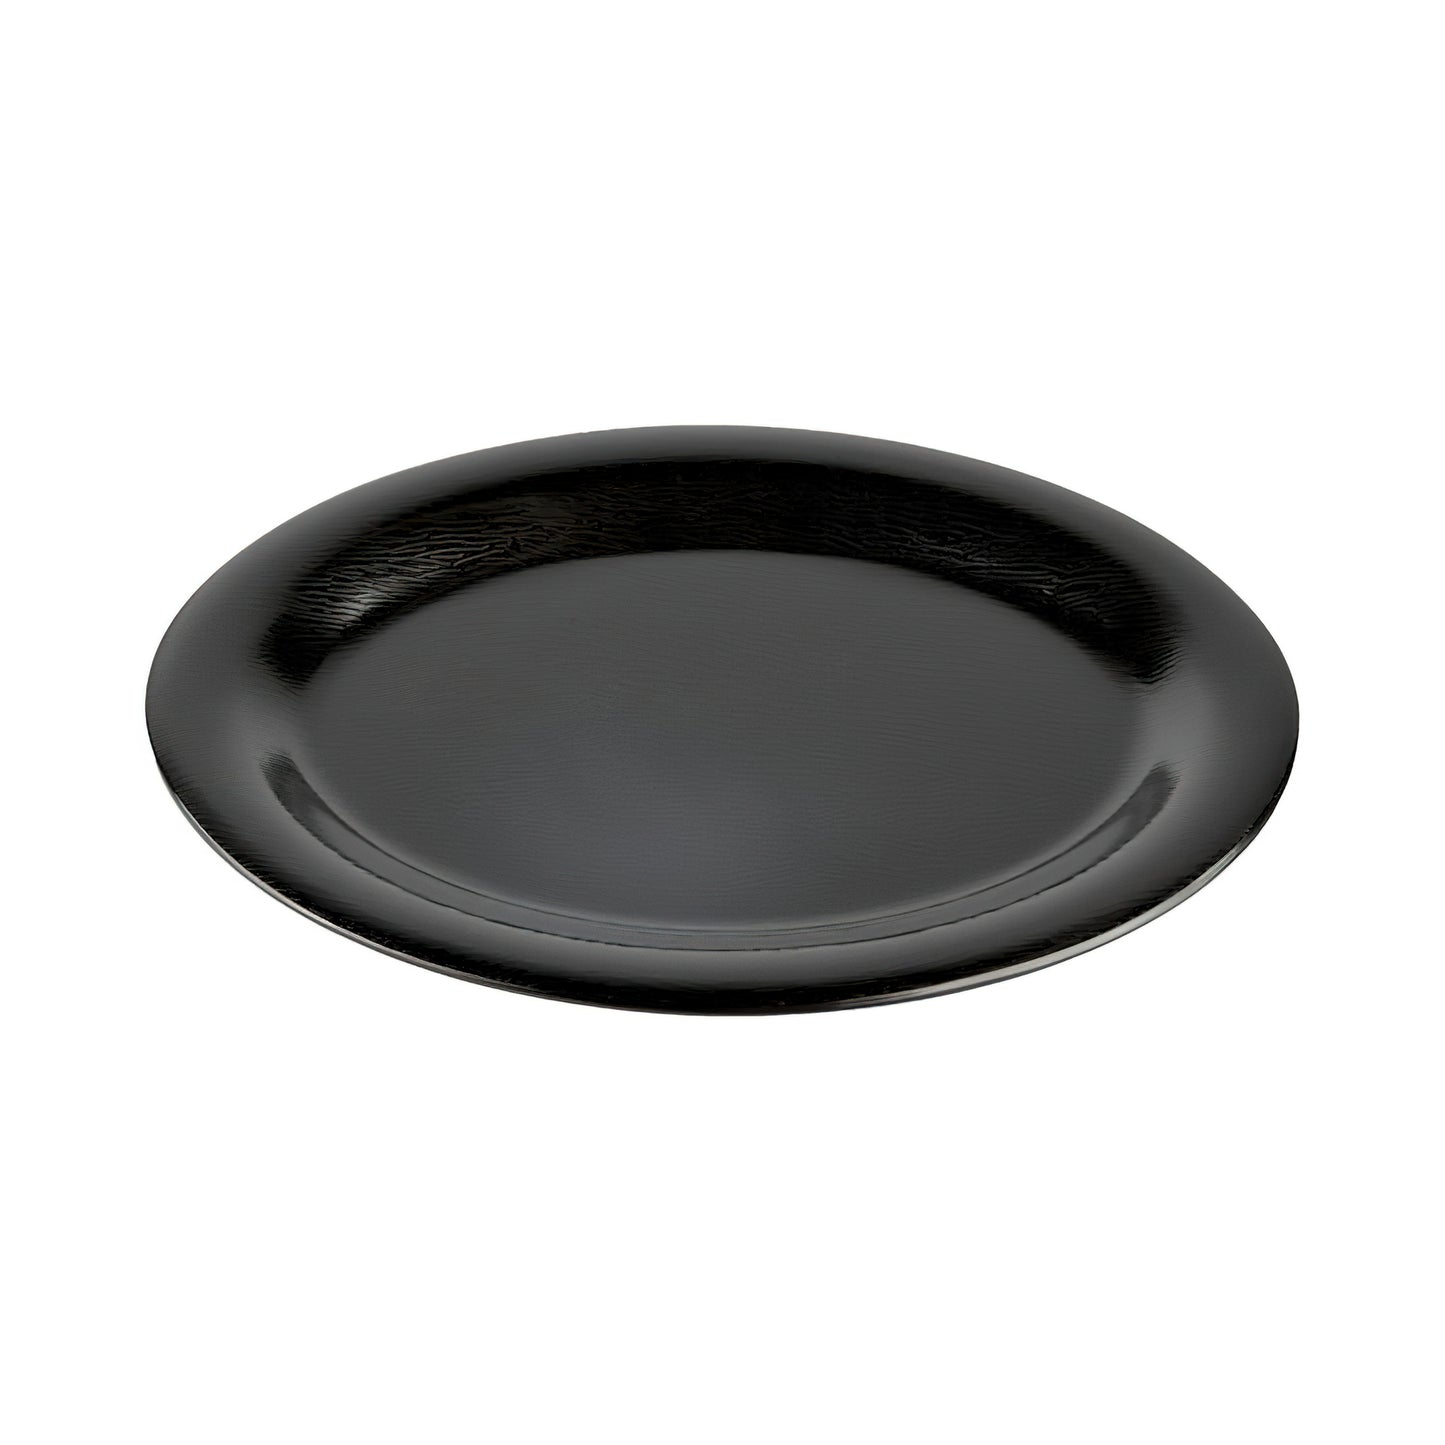 12"X9" Oval Platter, Etchedwa (12 Pack)